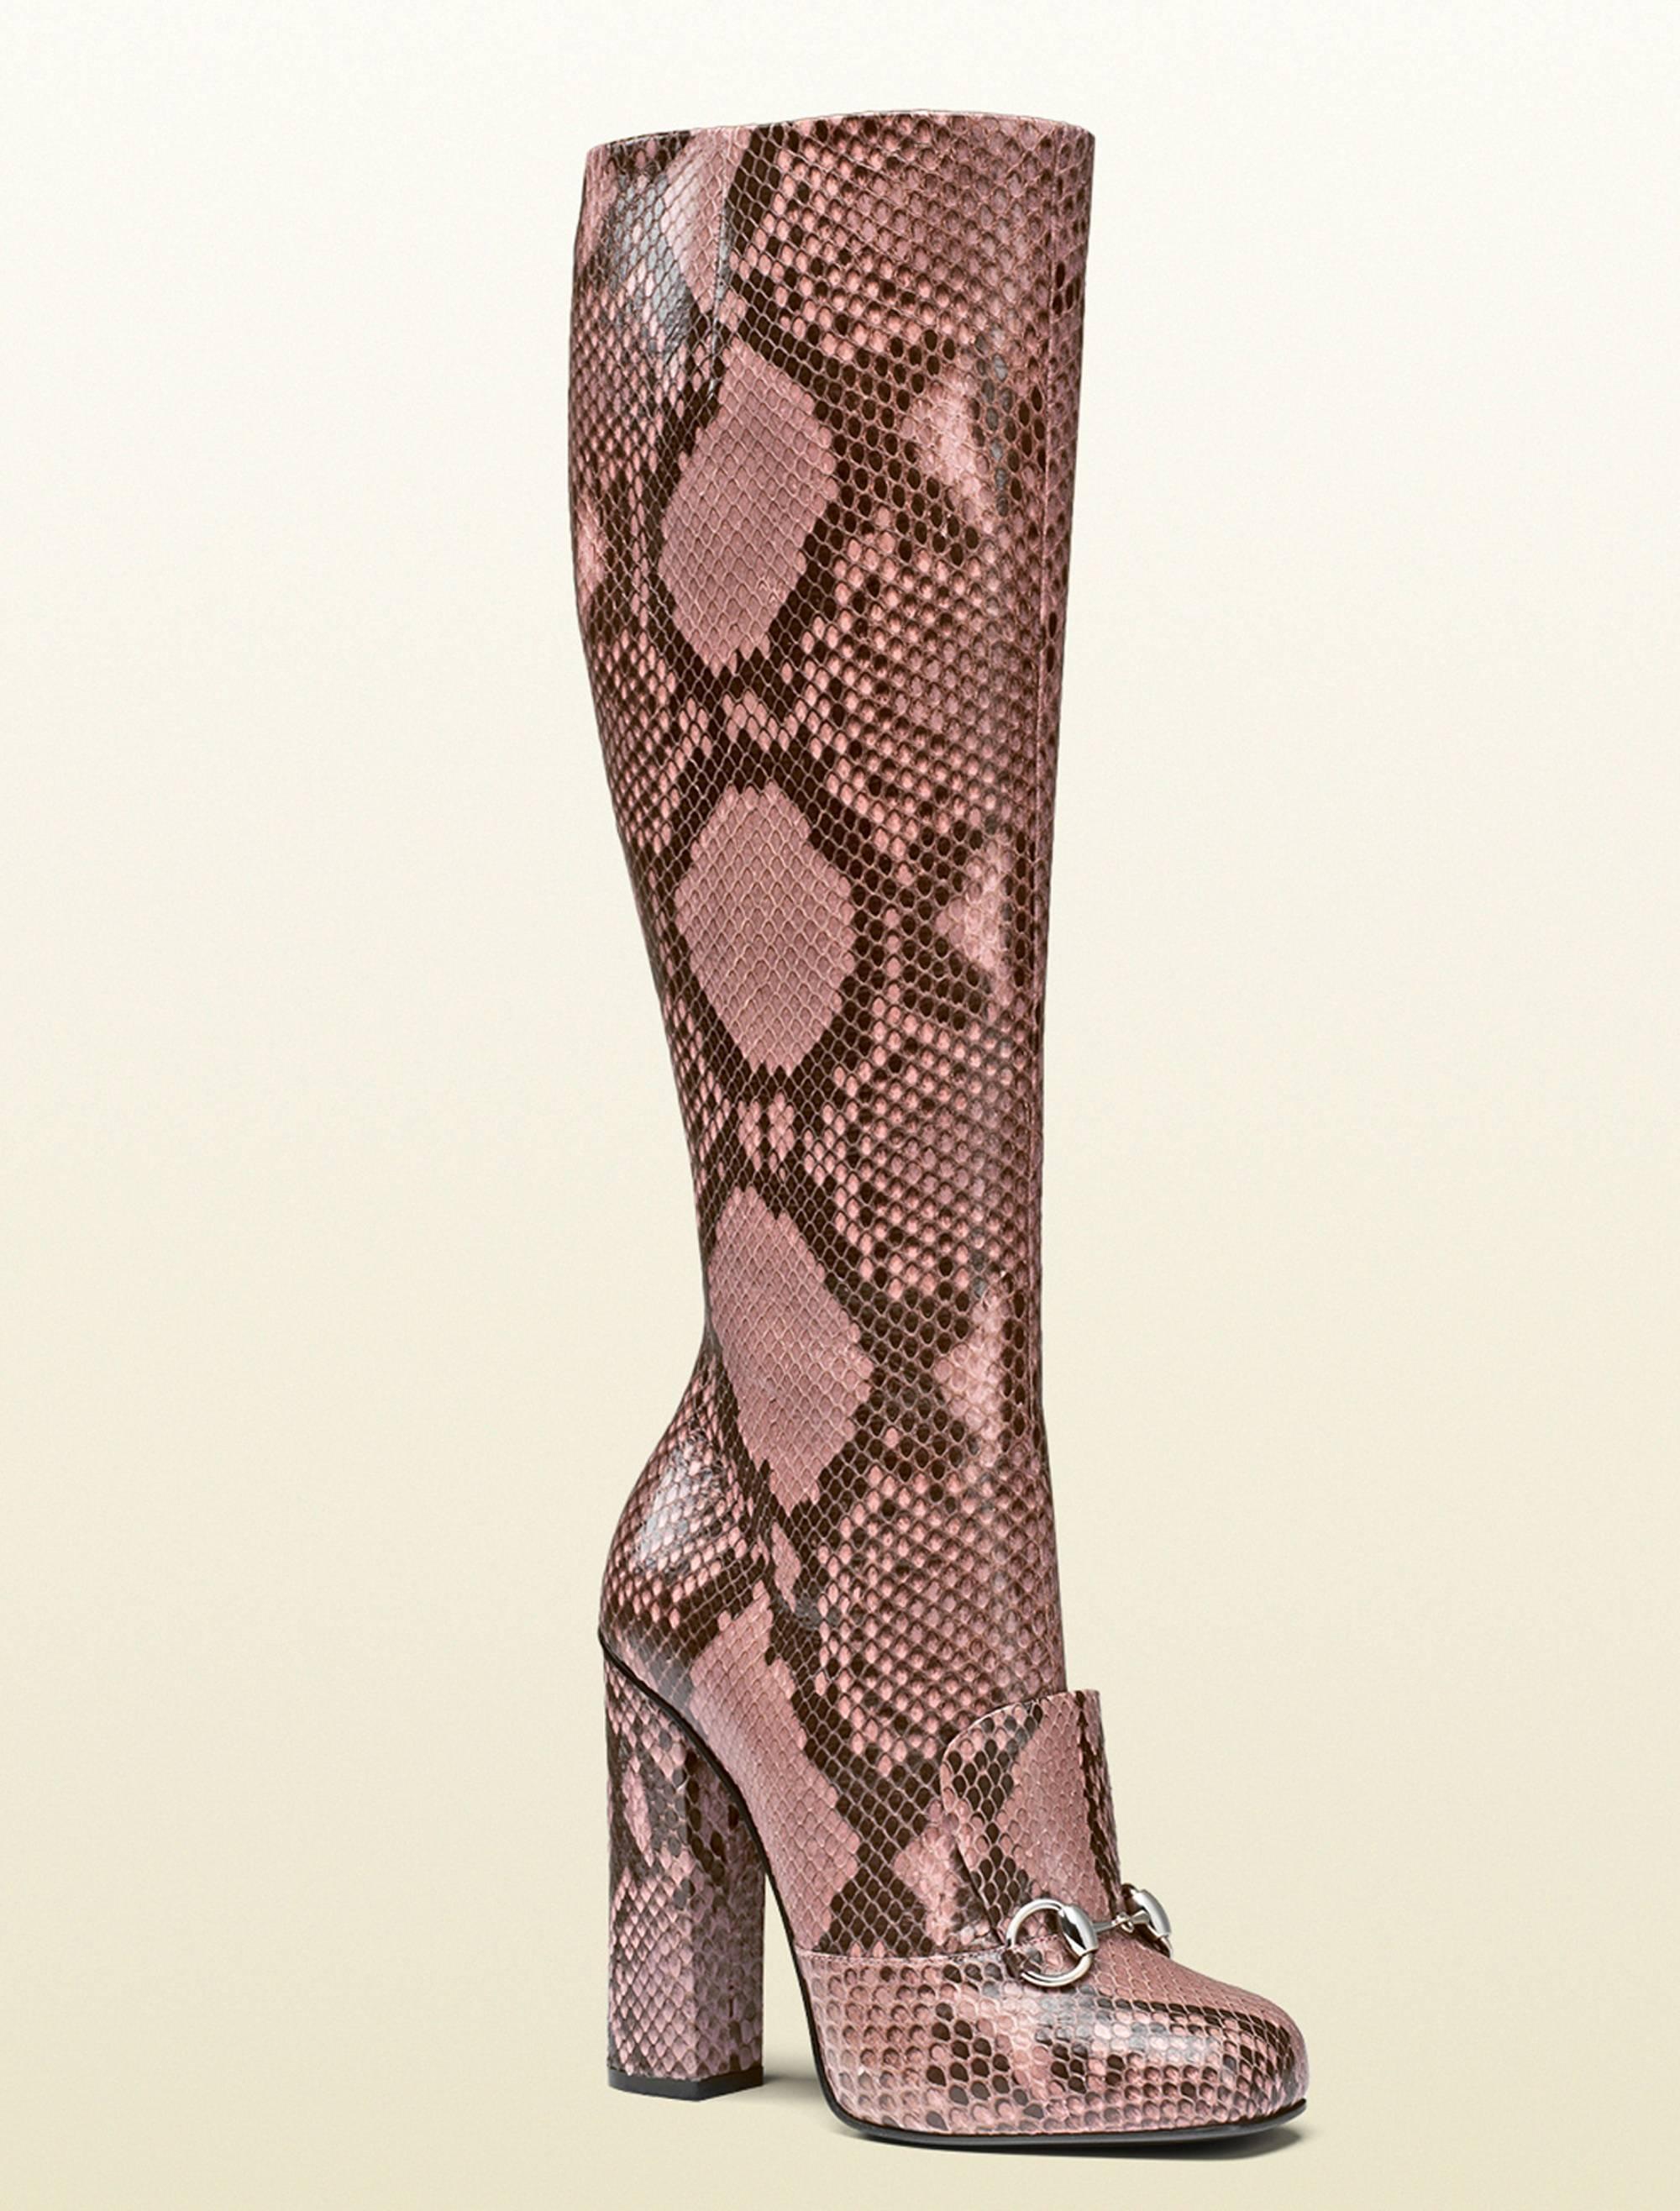 CUT SLIM TO SHOWCASE YOUR LEGS, THE SEASON'S MUST-HAVE BOOTS BREATHE RETRO-TINGED SOPHISTICATION WITH PRECIOUS CANDY-COLORED PYTHON AND A CHIC STACKED HEEL.
 
NEW GUCCI PYTHON KNEE HEIGHT BOOTS
IT SIZES: 36.5 – US 6.5, 39.5 - US 9.5
COLORS -